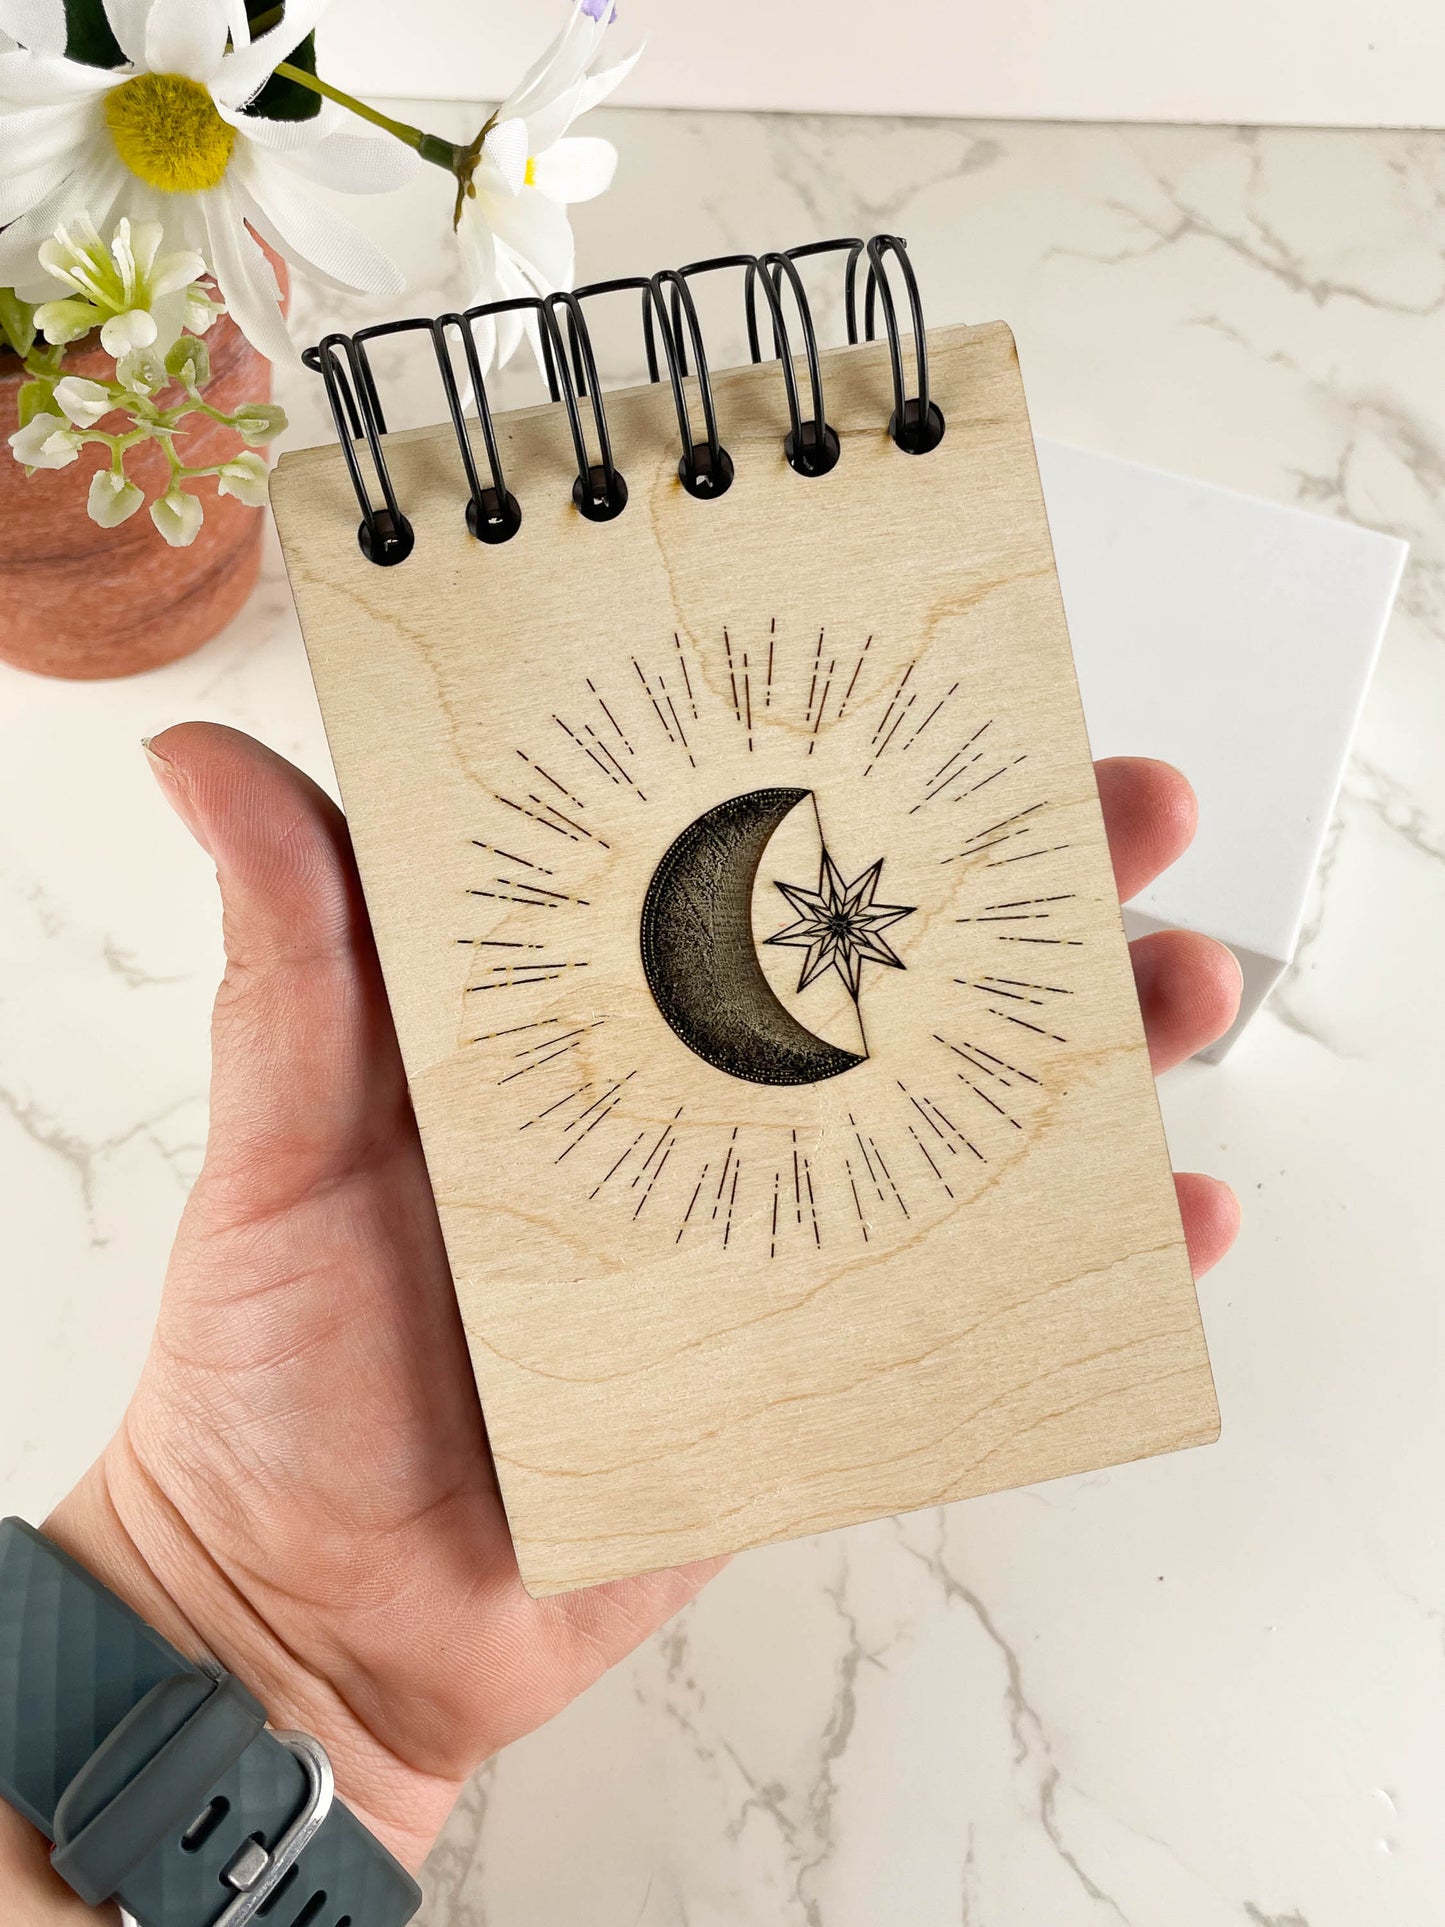 Handcrafted Wooden Notepad with the stars and moon